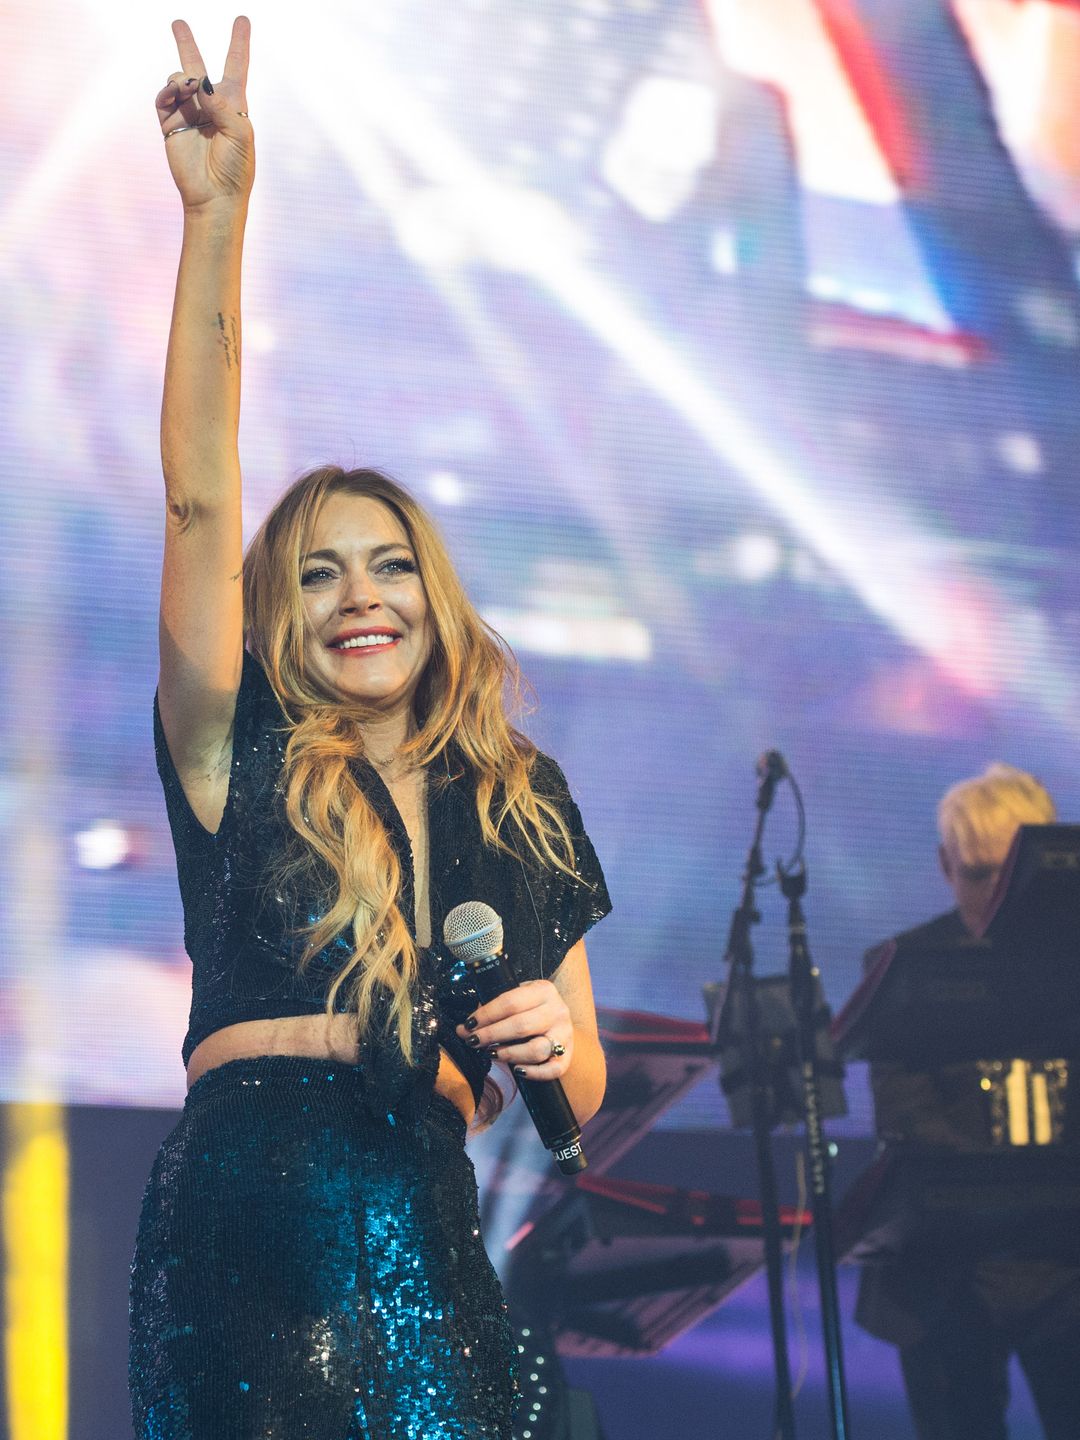  Lindsay Lohan smiling while singing on a stage